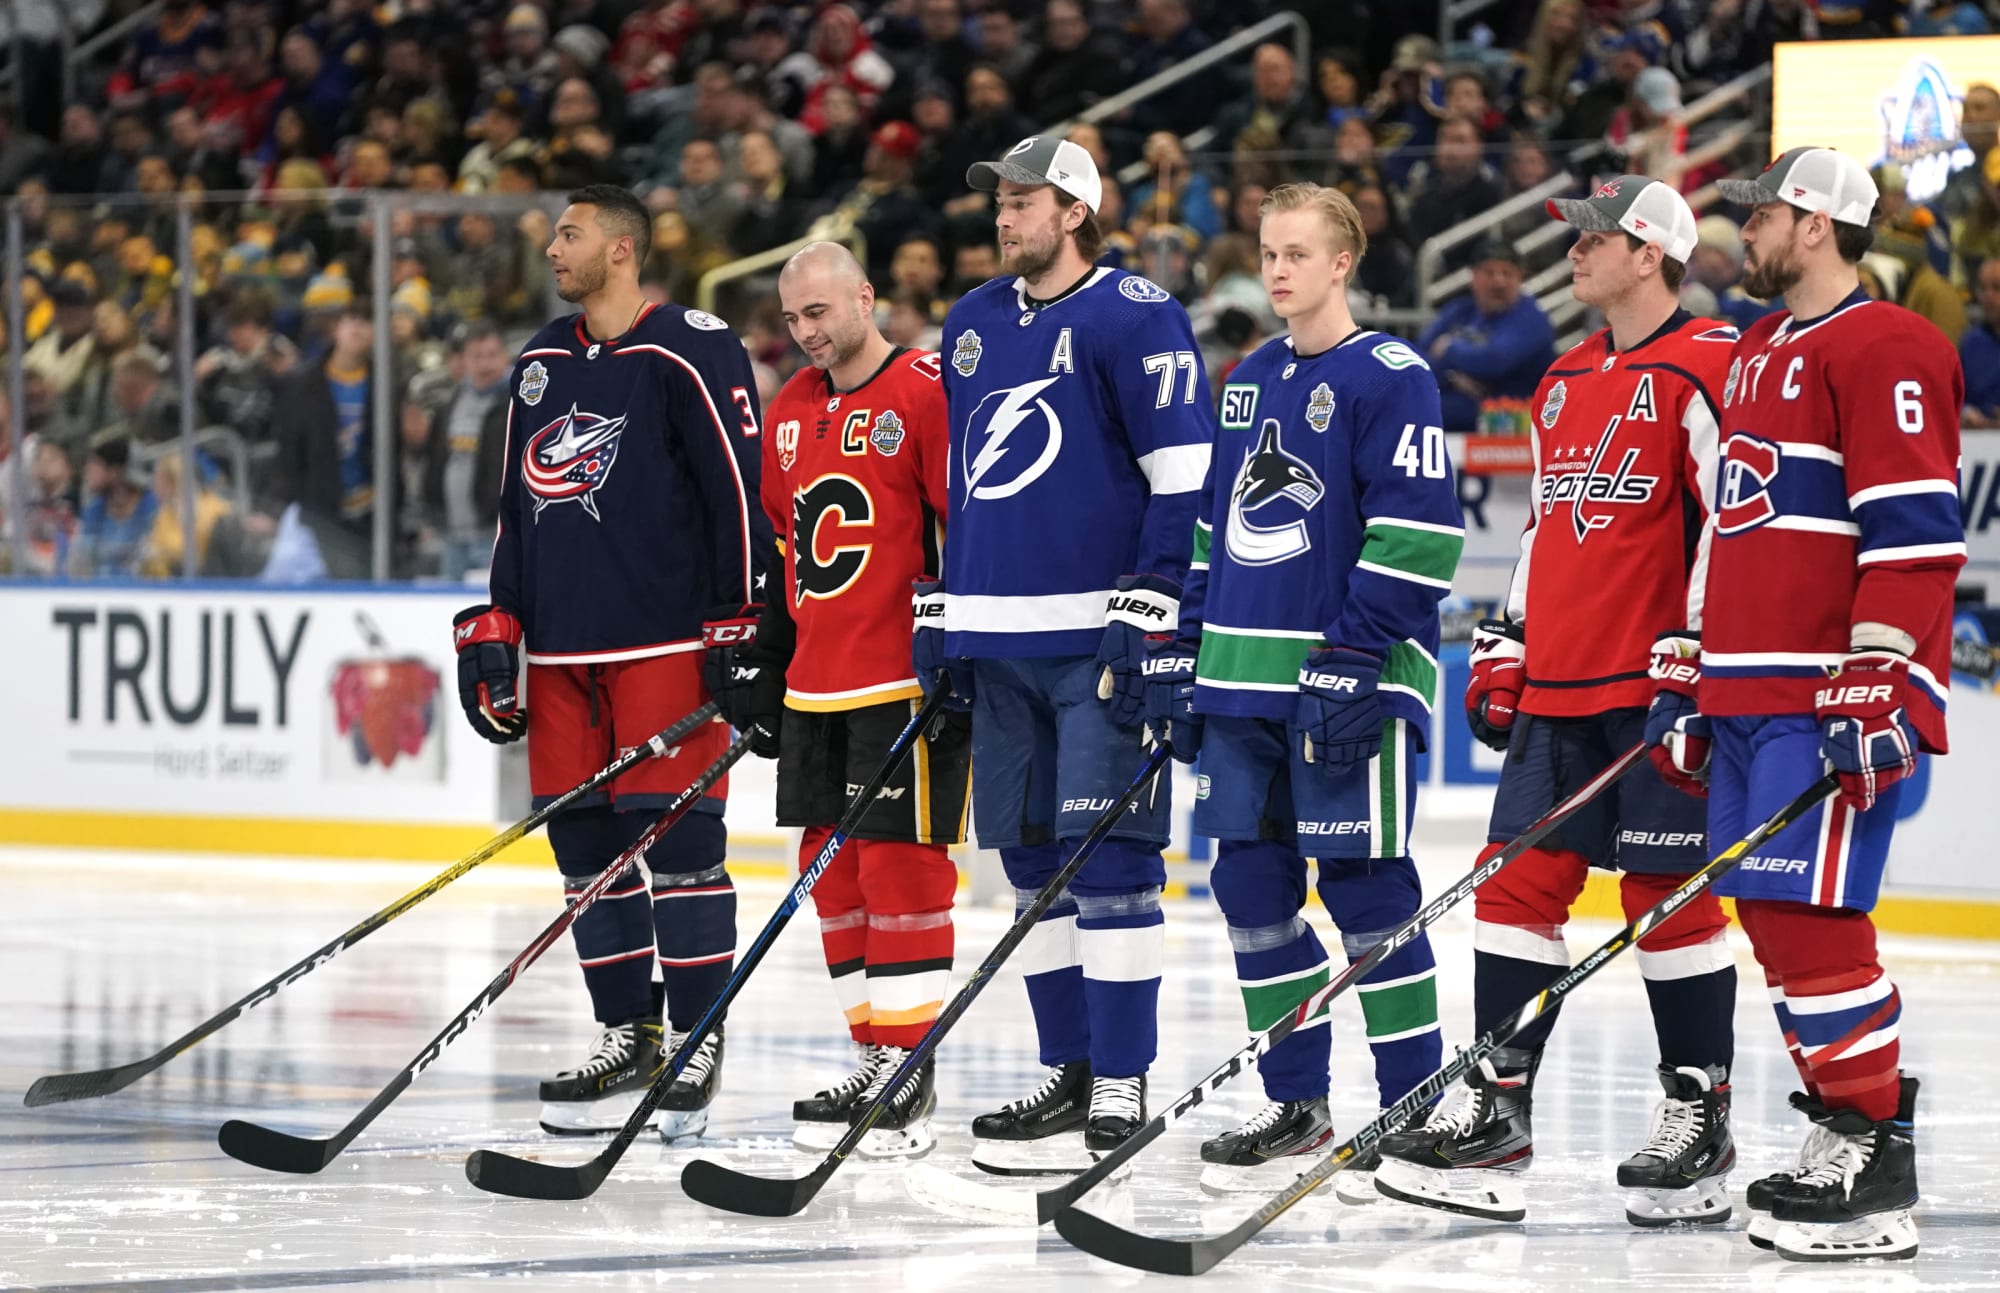 2020 NHL All-Star Game: Rosters, TV channel, live stream, predictions